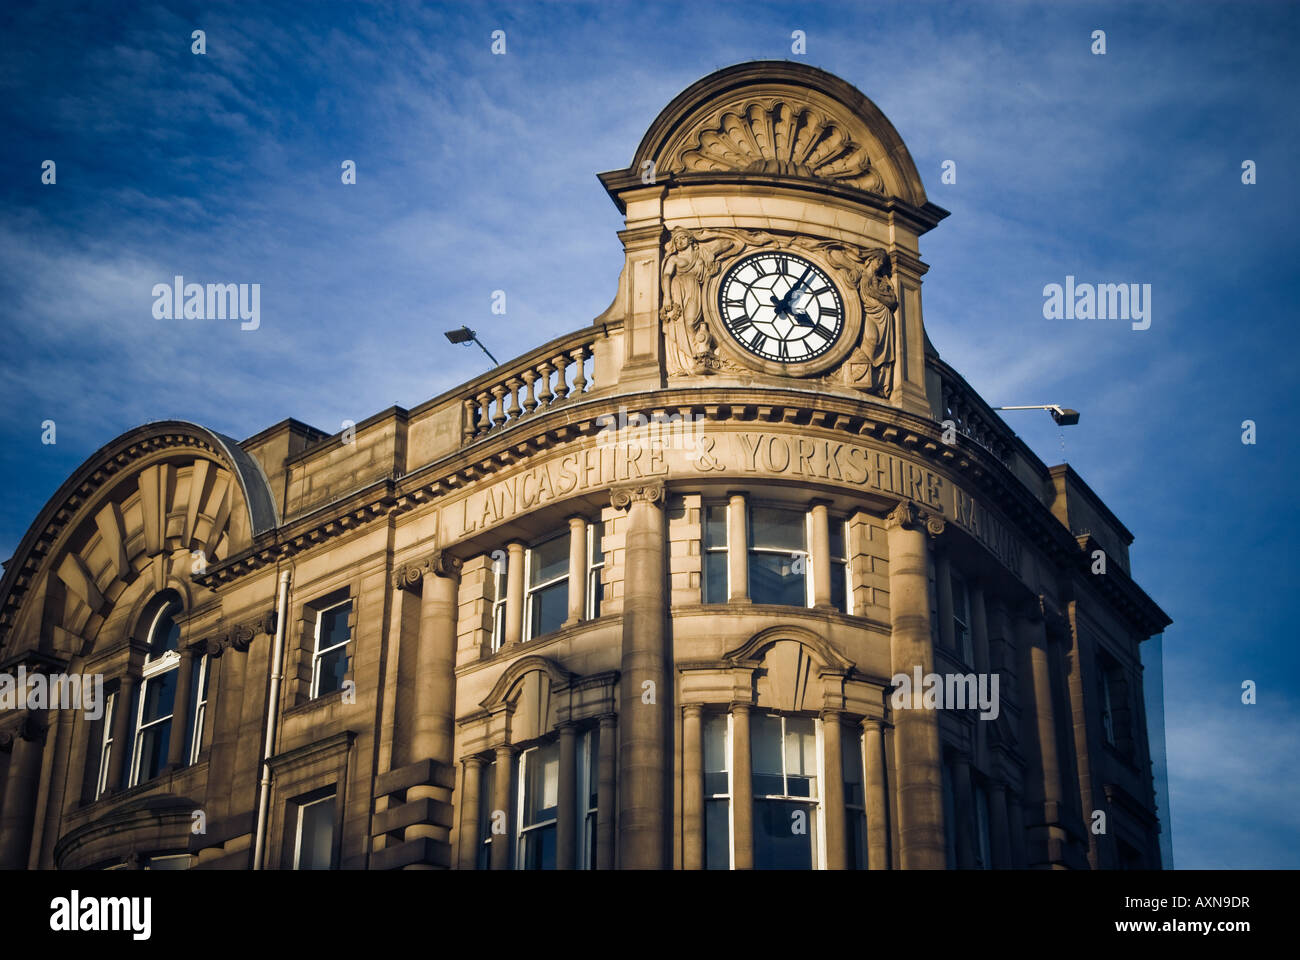 Victoria Railway Station Manchester Clock tower Stock Photo